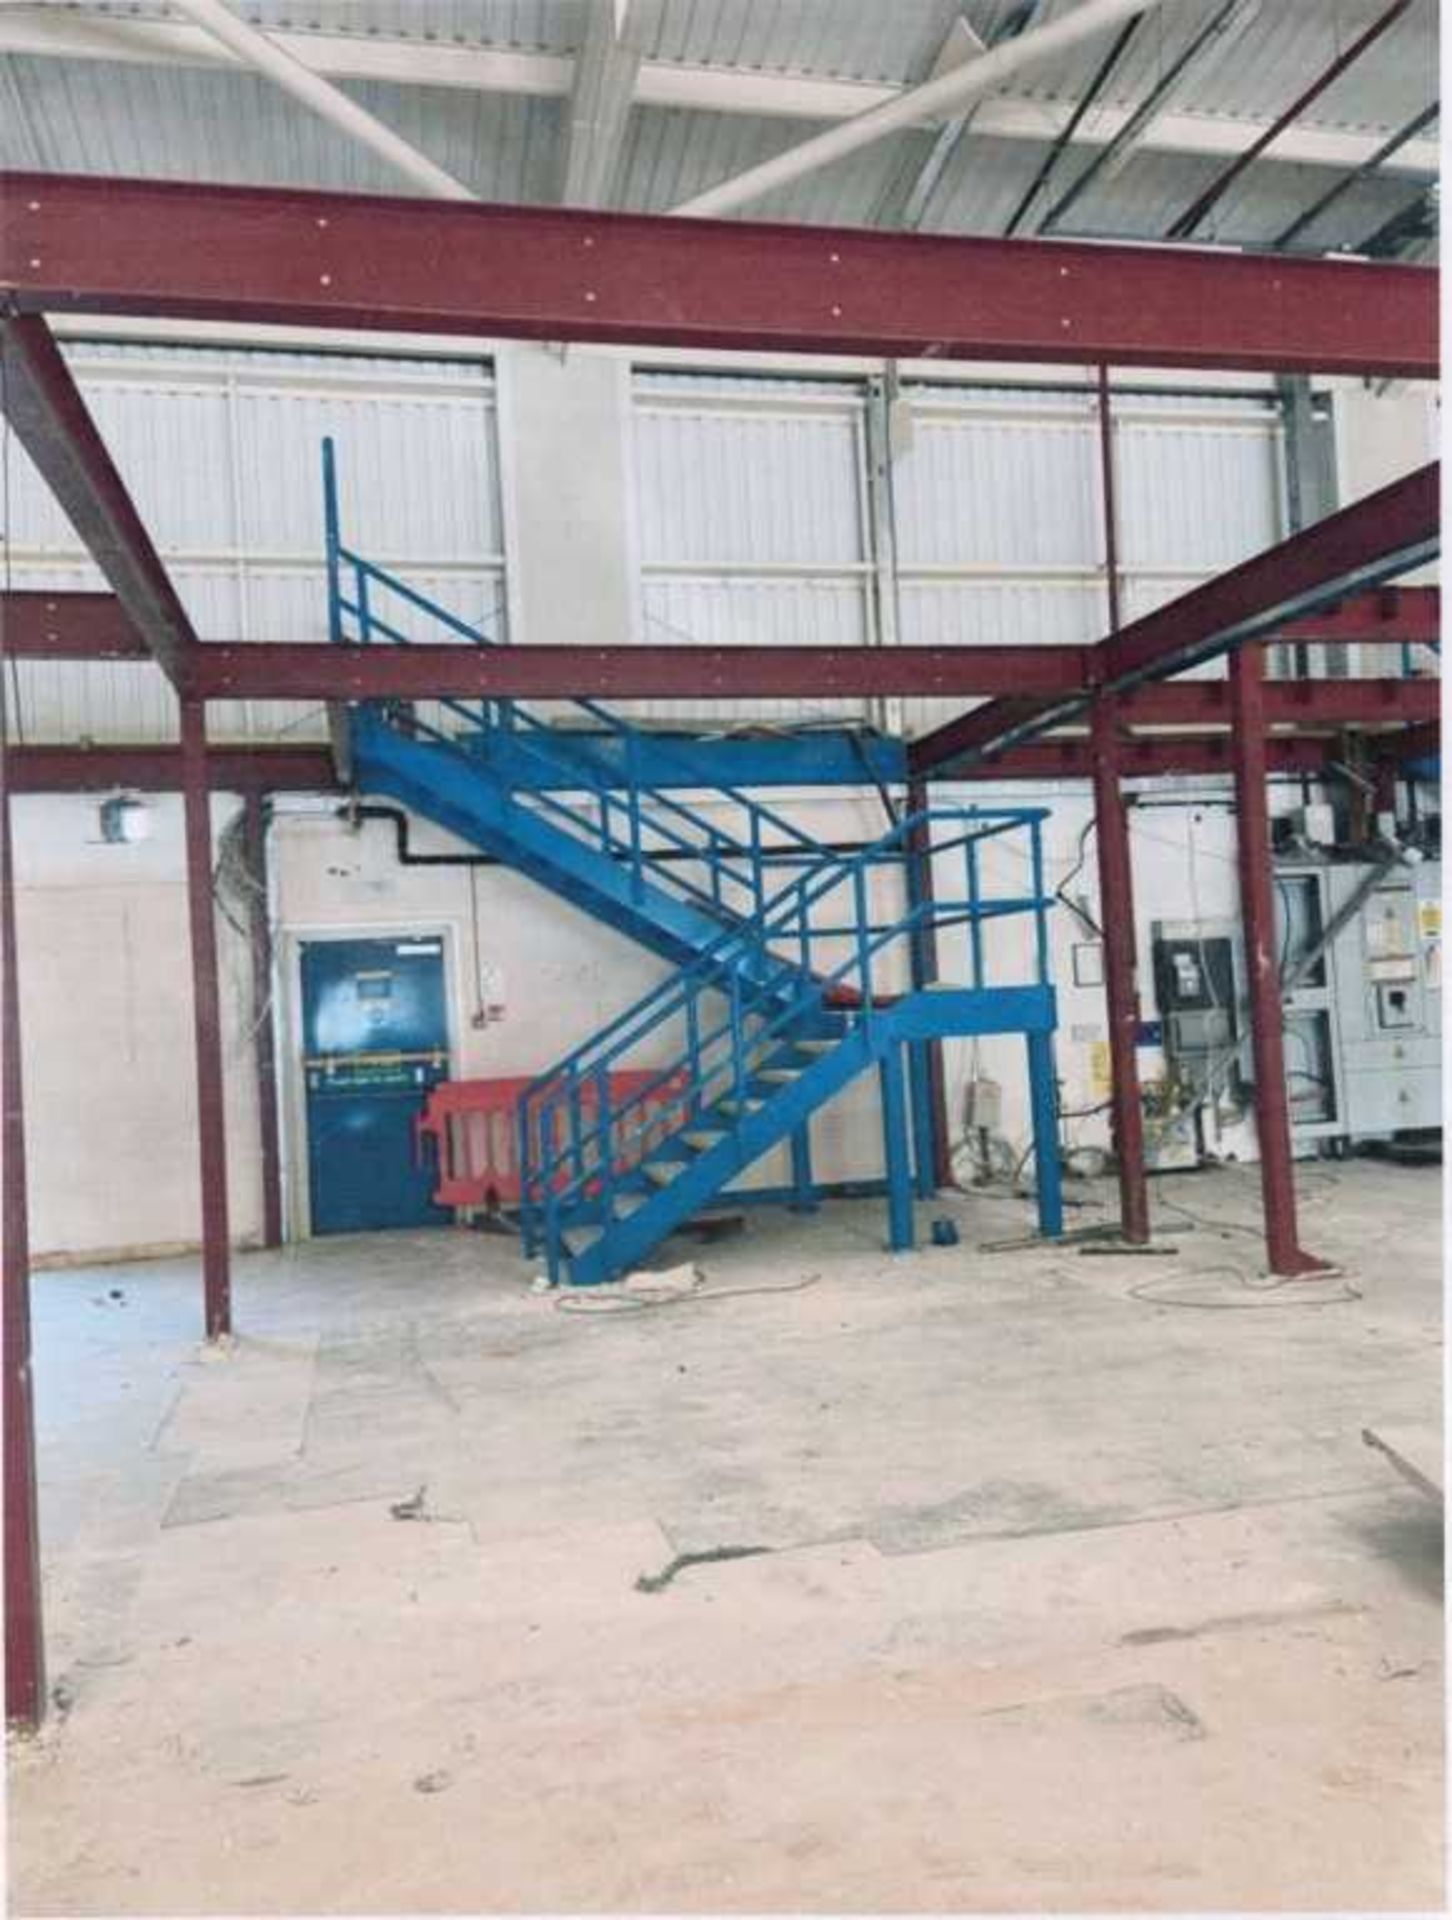 Mezzanine Floor (Approx 24m x 6.6m x 3m High) (No Flooring, No Railings) (Being Sold Offsite) - Image 4 of 7